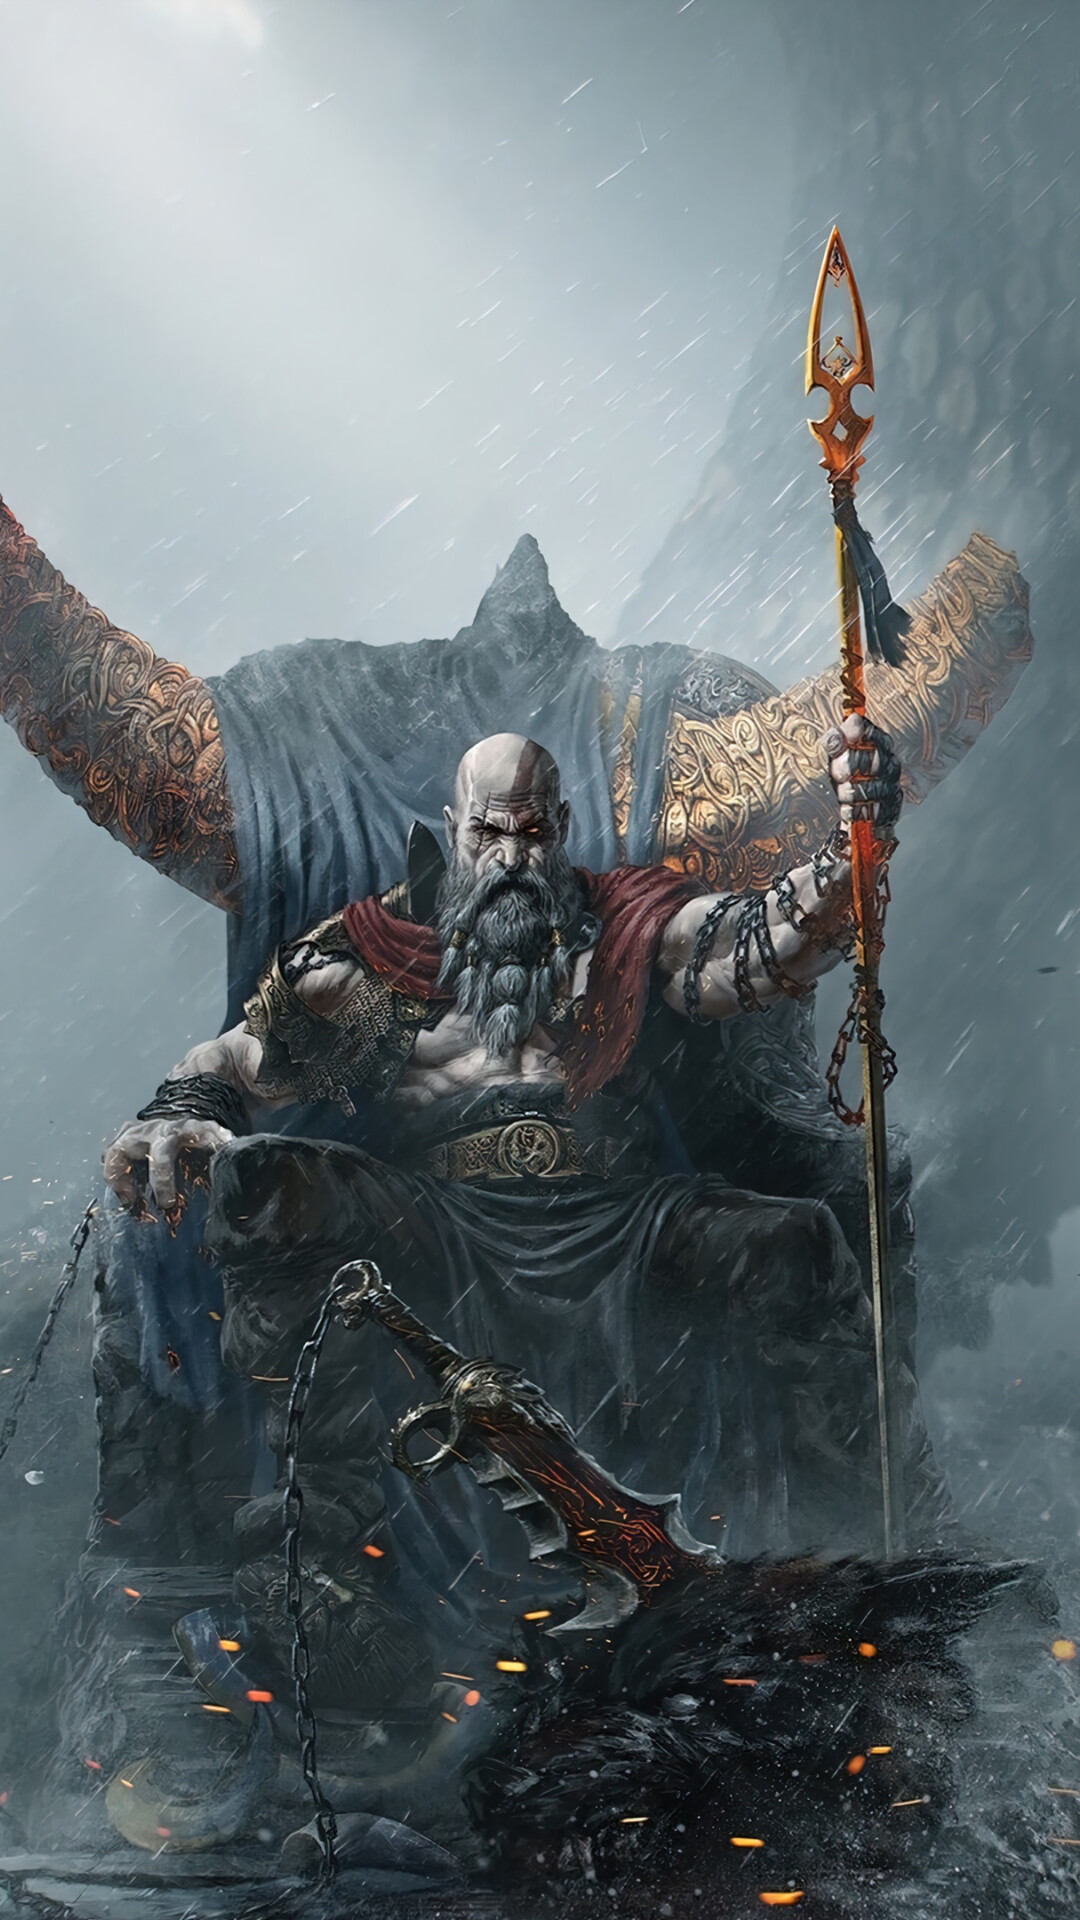 God of War: The constant machinations of the gods and Titans and their misuse of Kratos eventually drive him to destroy Mount Olympus, Video game. 1080x1920 Full HD Wallpaper.